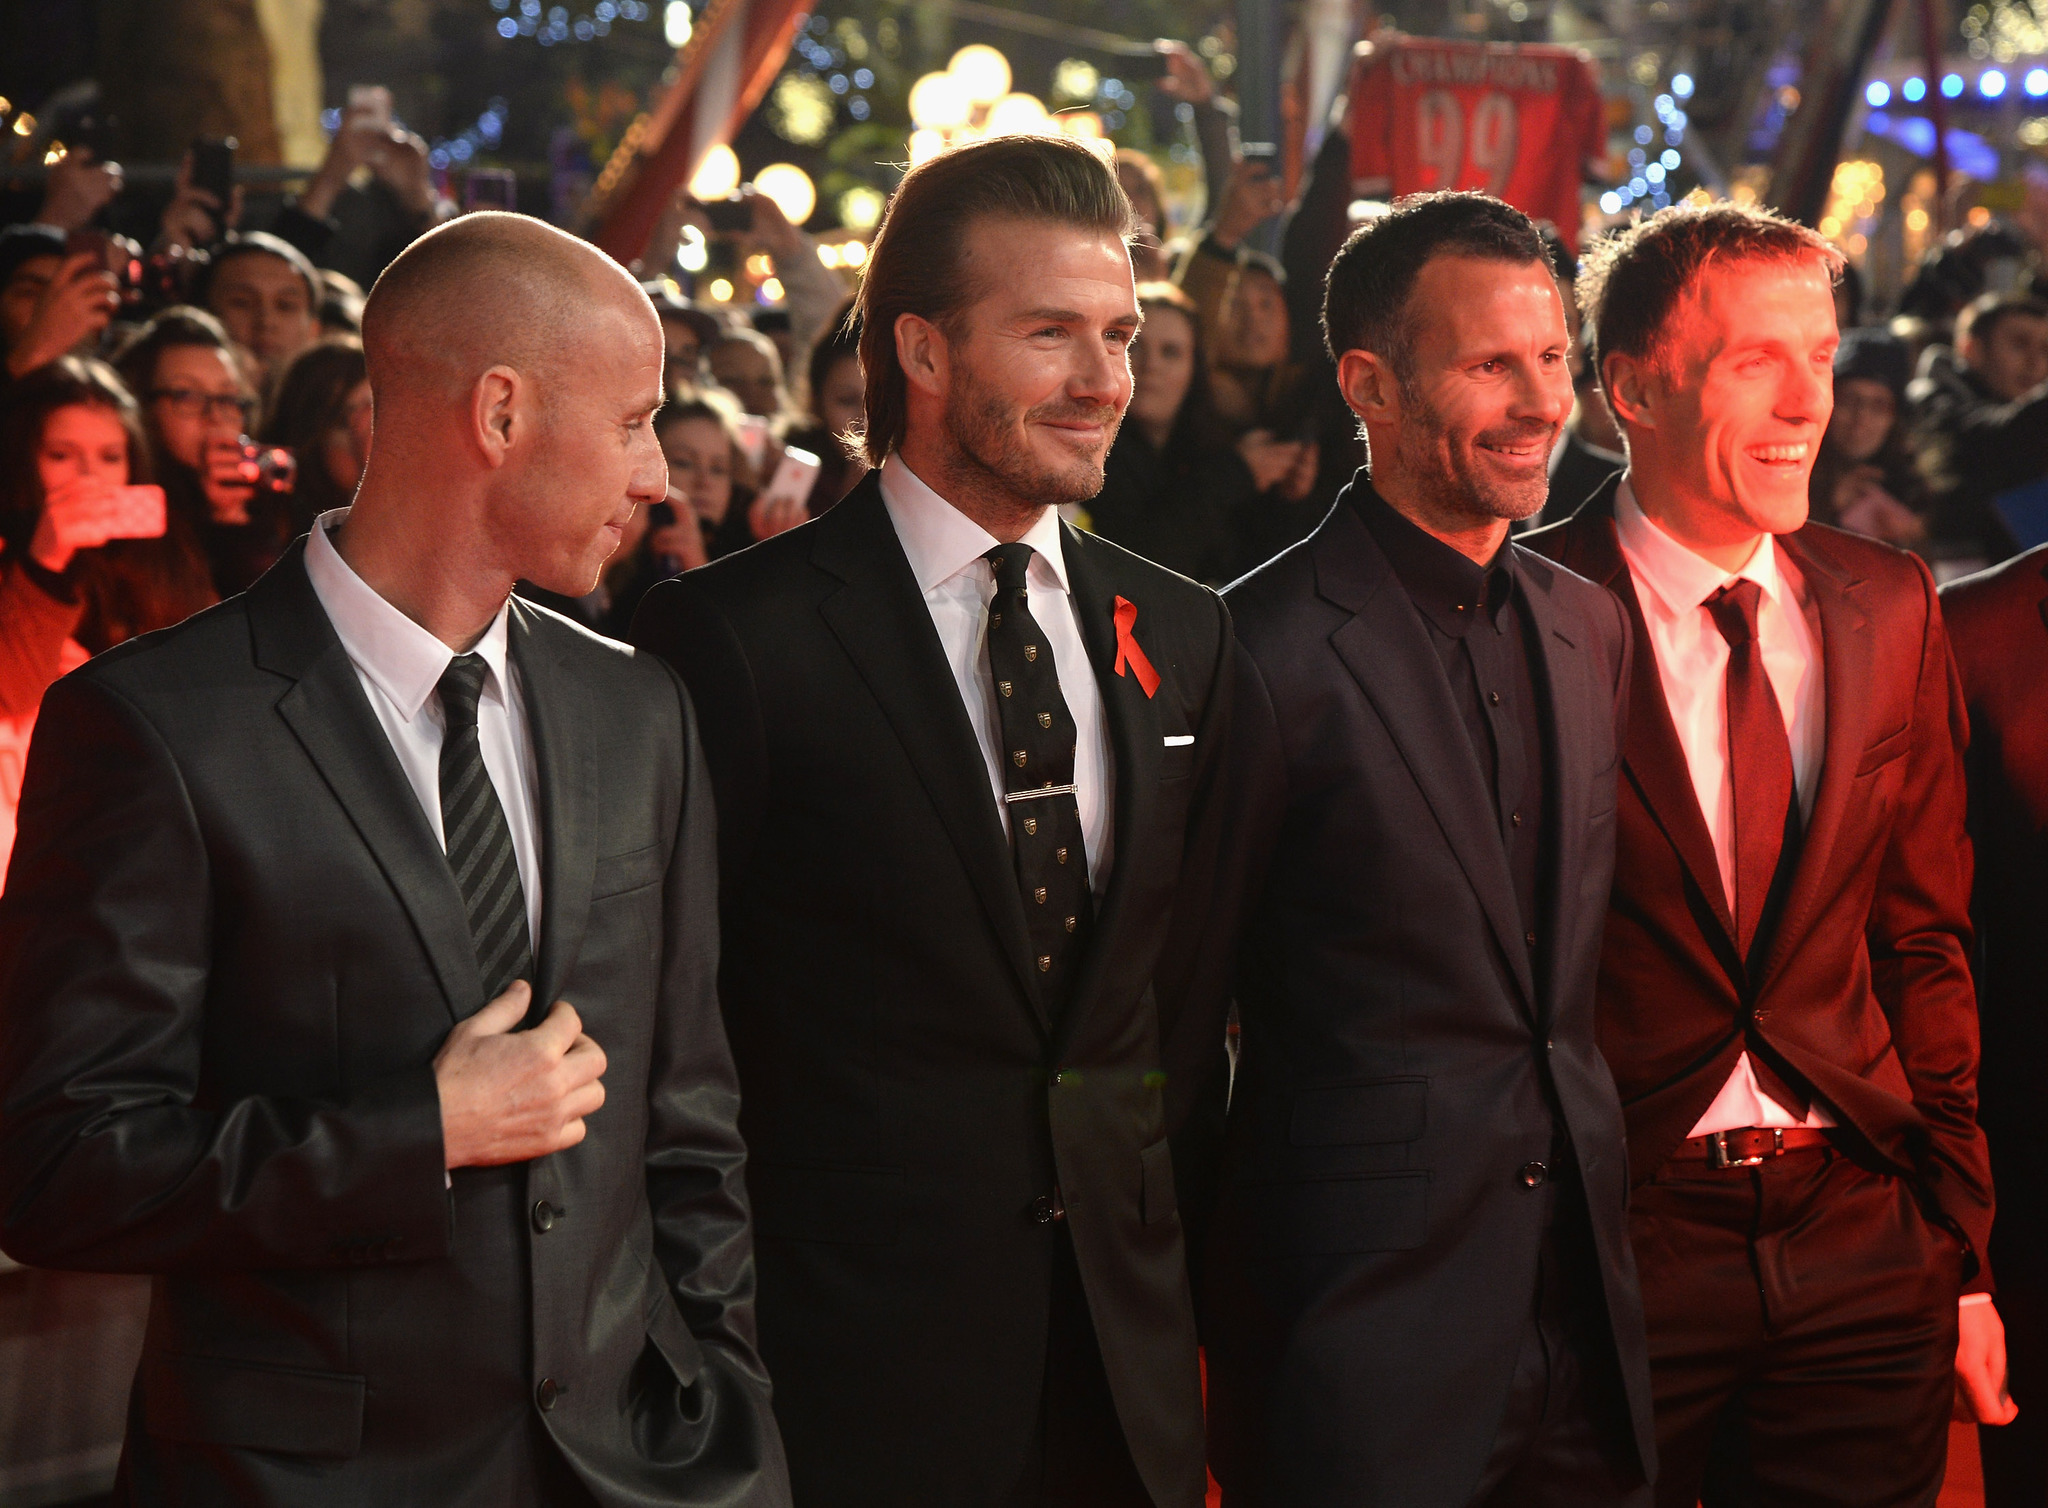 David Beckham, Ryan Giggs, Phil Neville and Nicky Butt at event of The Class of 92 (2013)